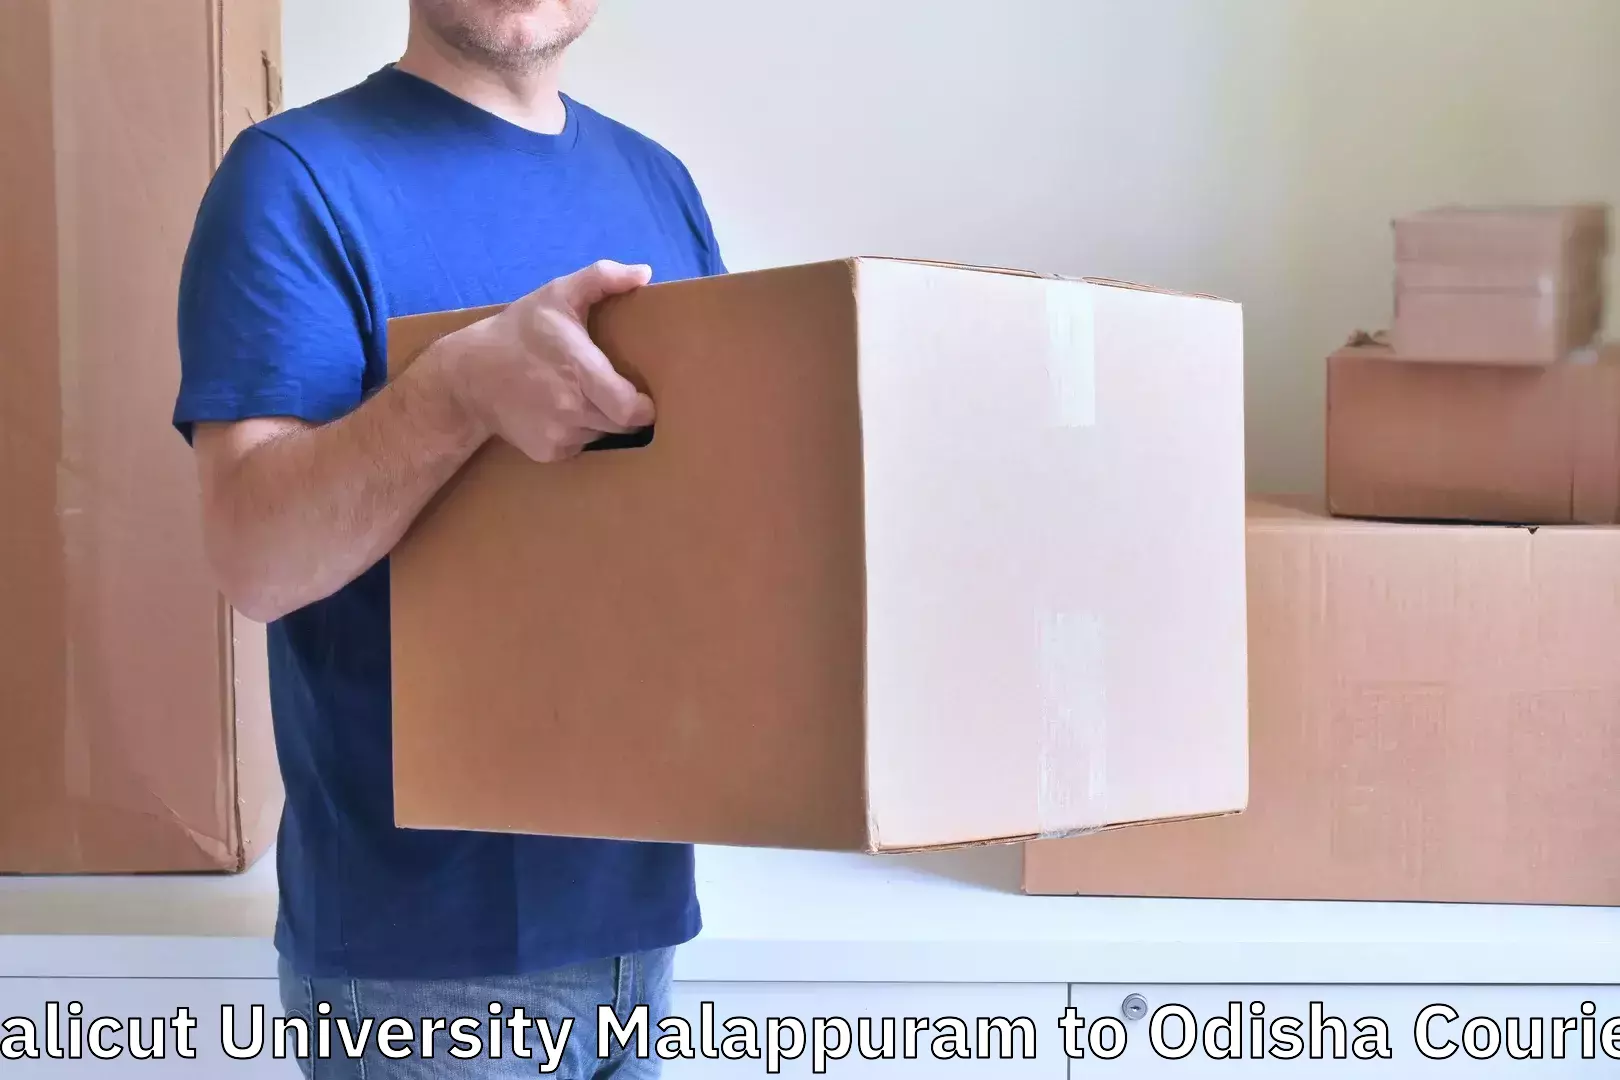 Luggage delivery system Calicut University Malappuram to Adaspur